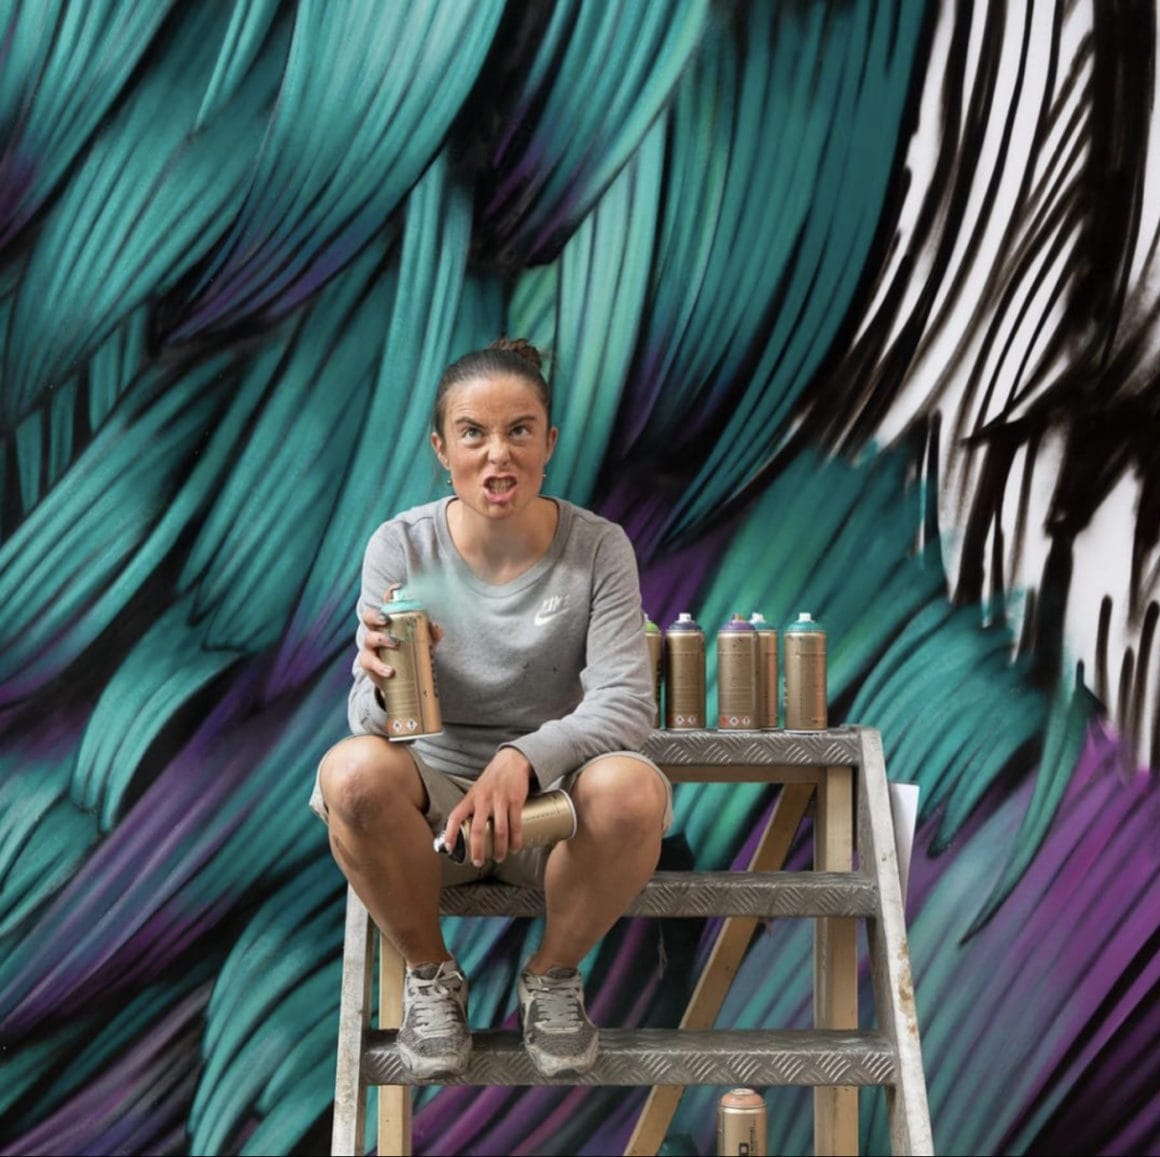 Adele sits on scaffolding in front of her mural depicting blue, purple and green feathers